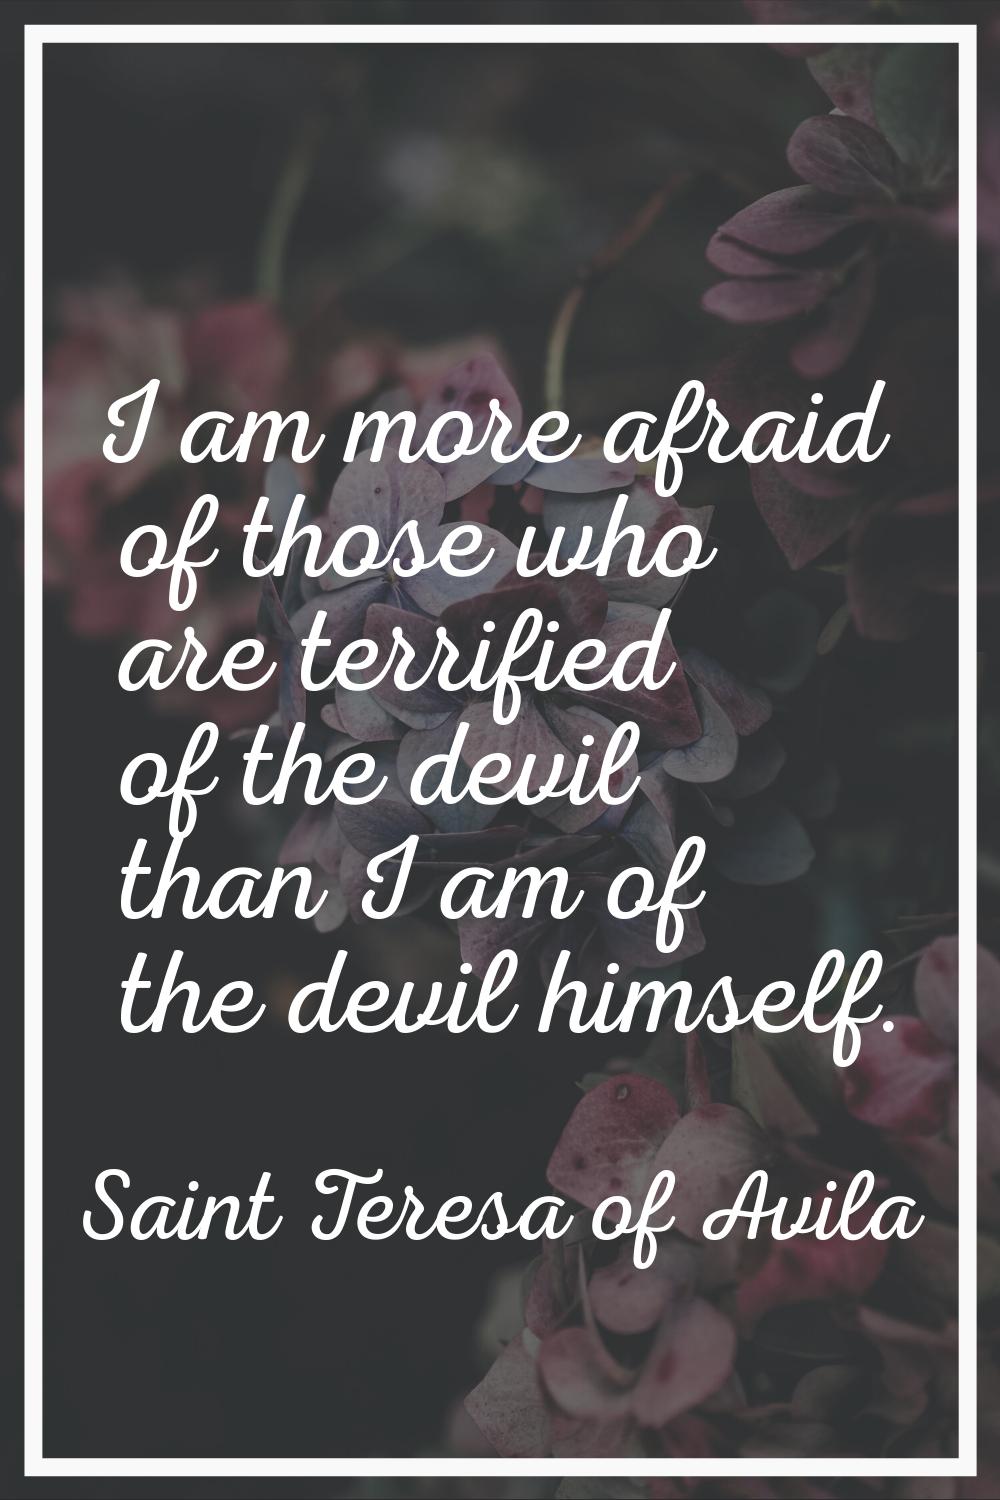 I am more afraid of those who are terrified of the devil than I am of the devil himself.